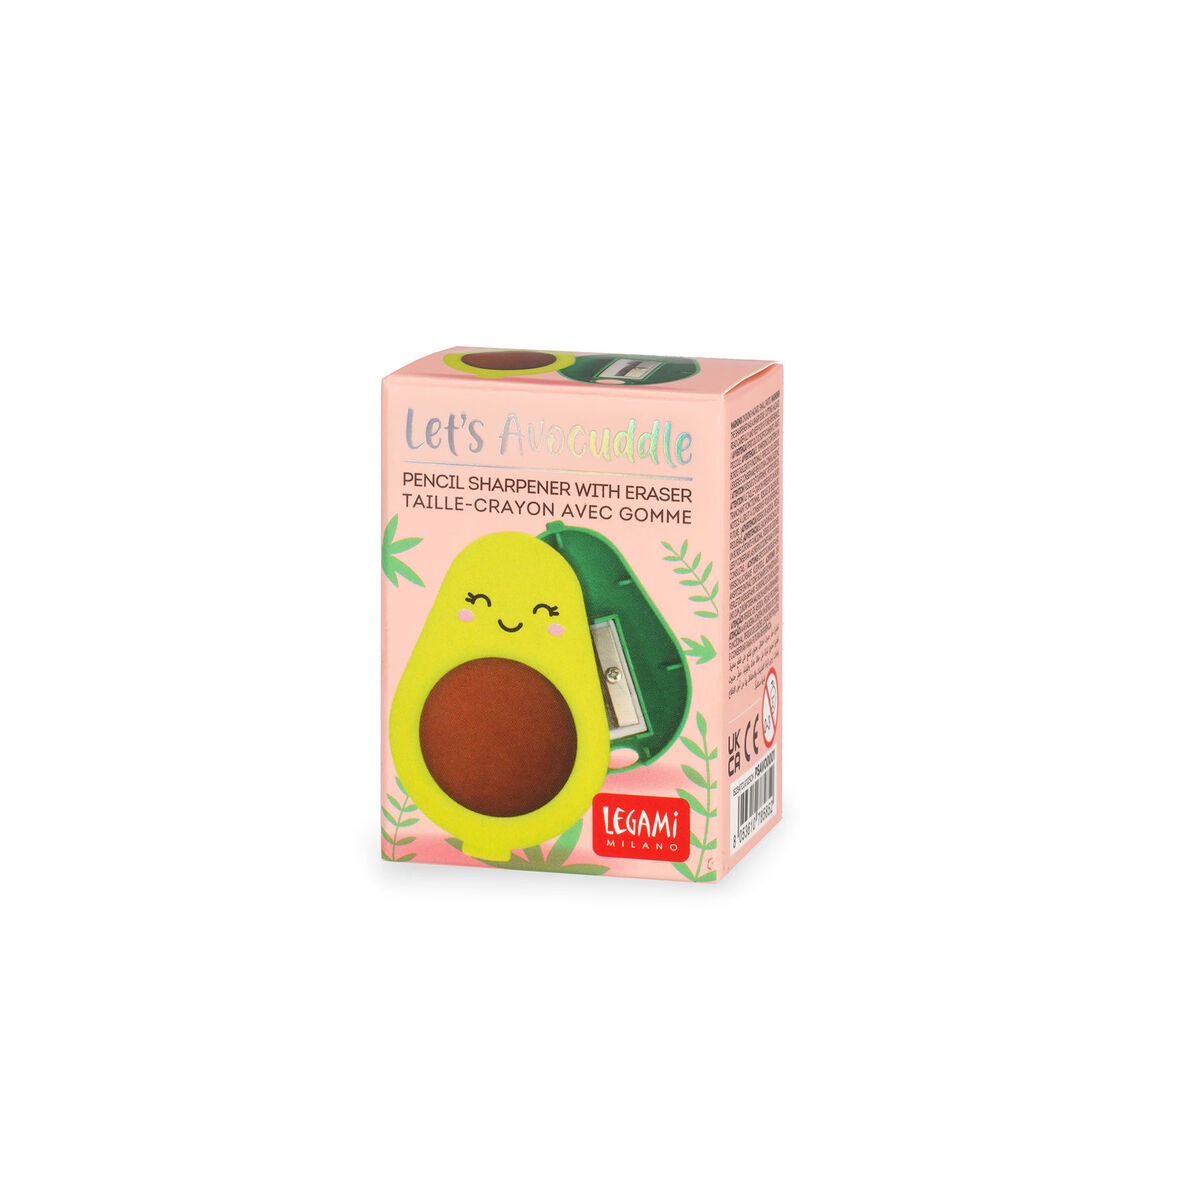 Pencil Sharpener With Eraser - Let’s Avocuddle, , zoo